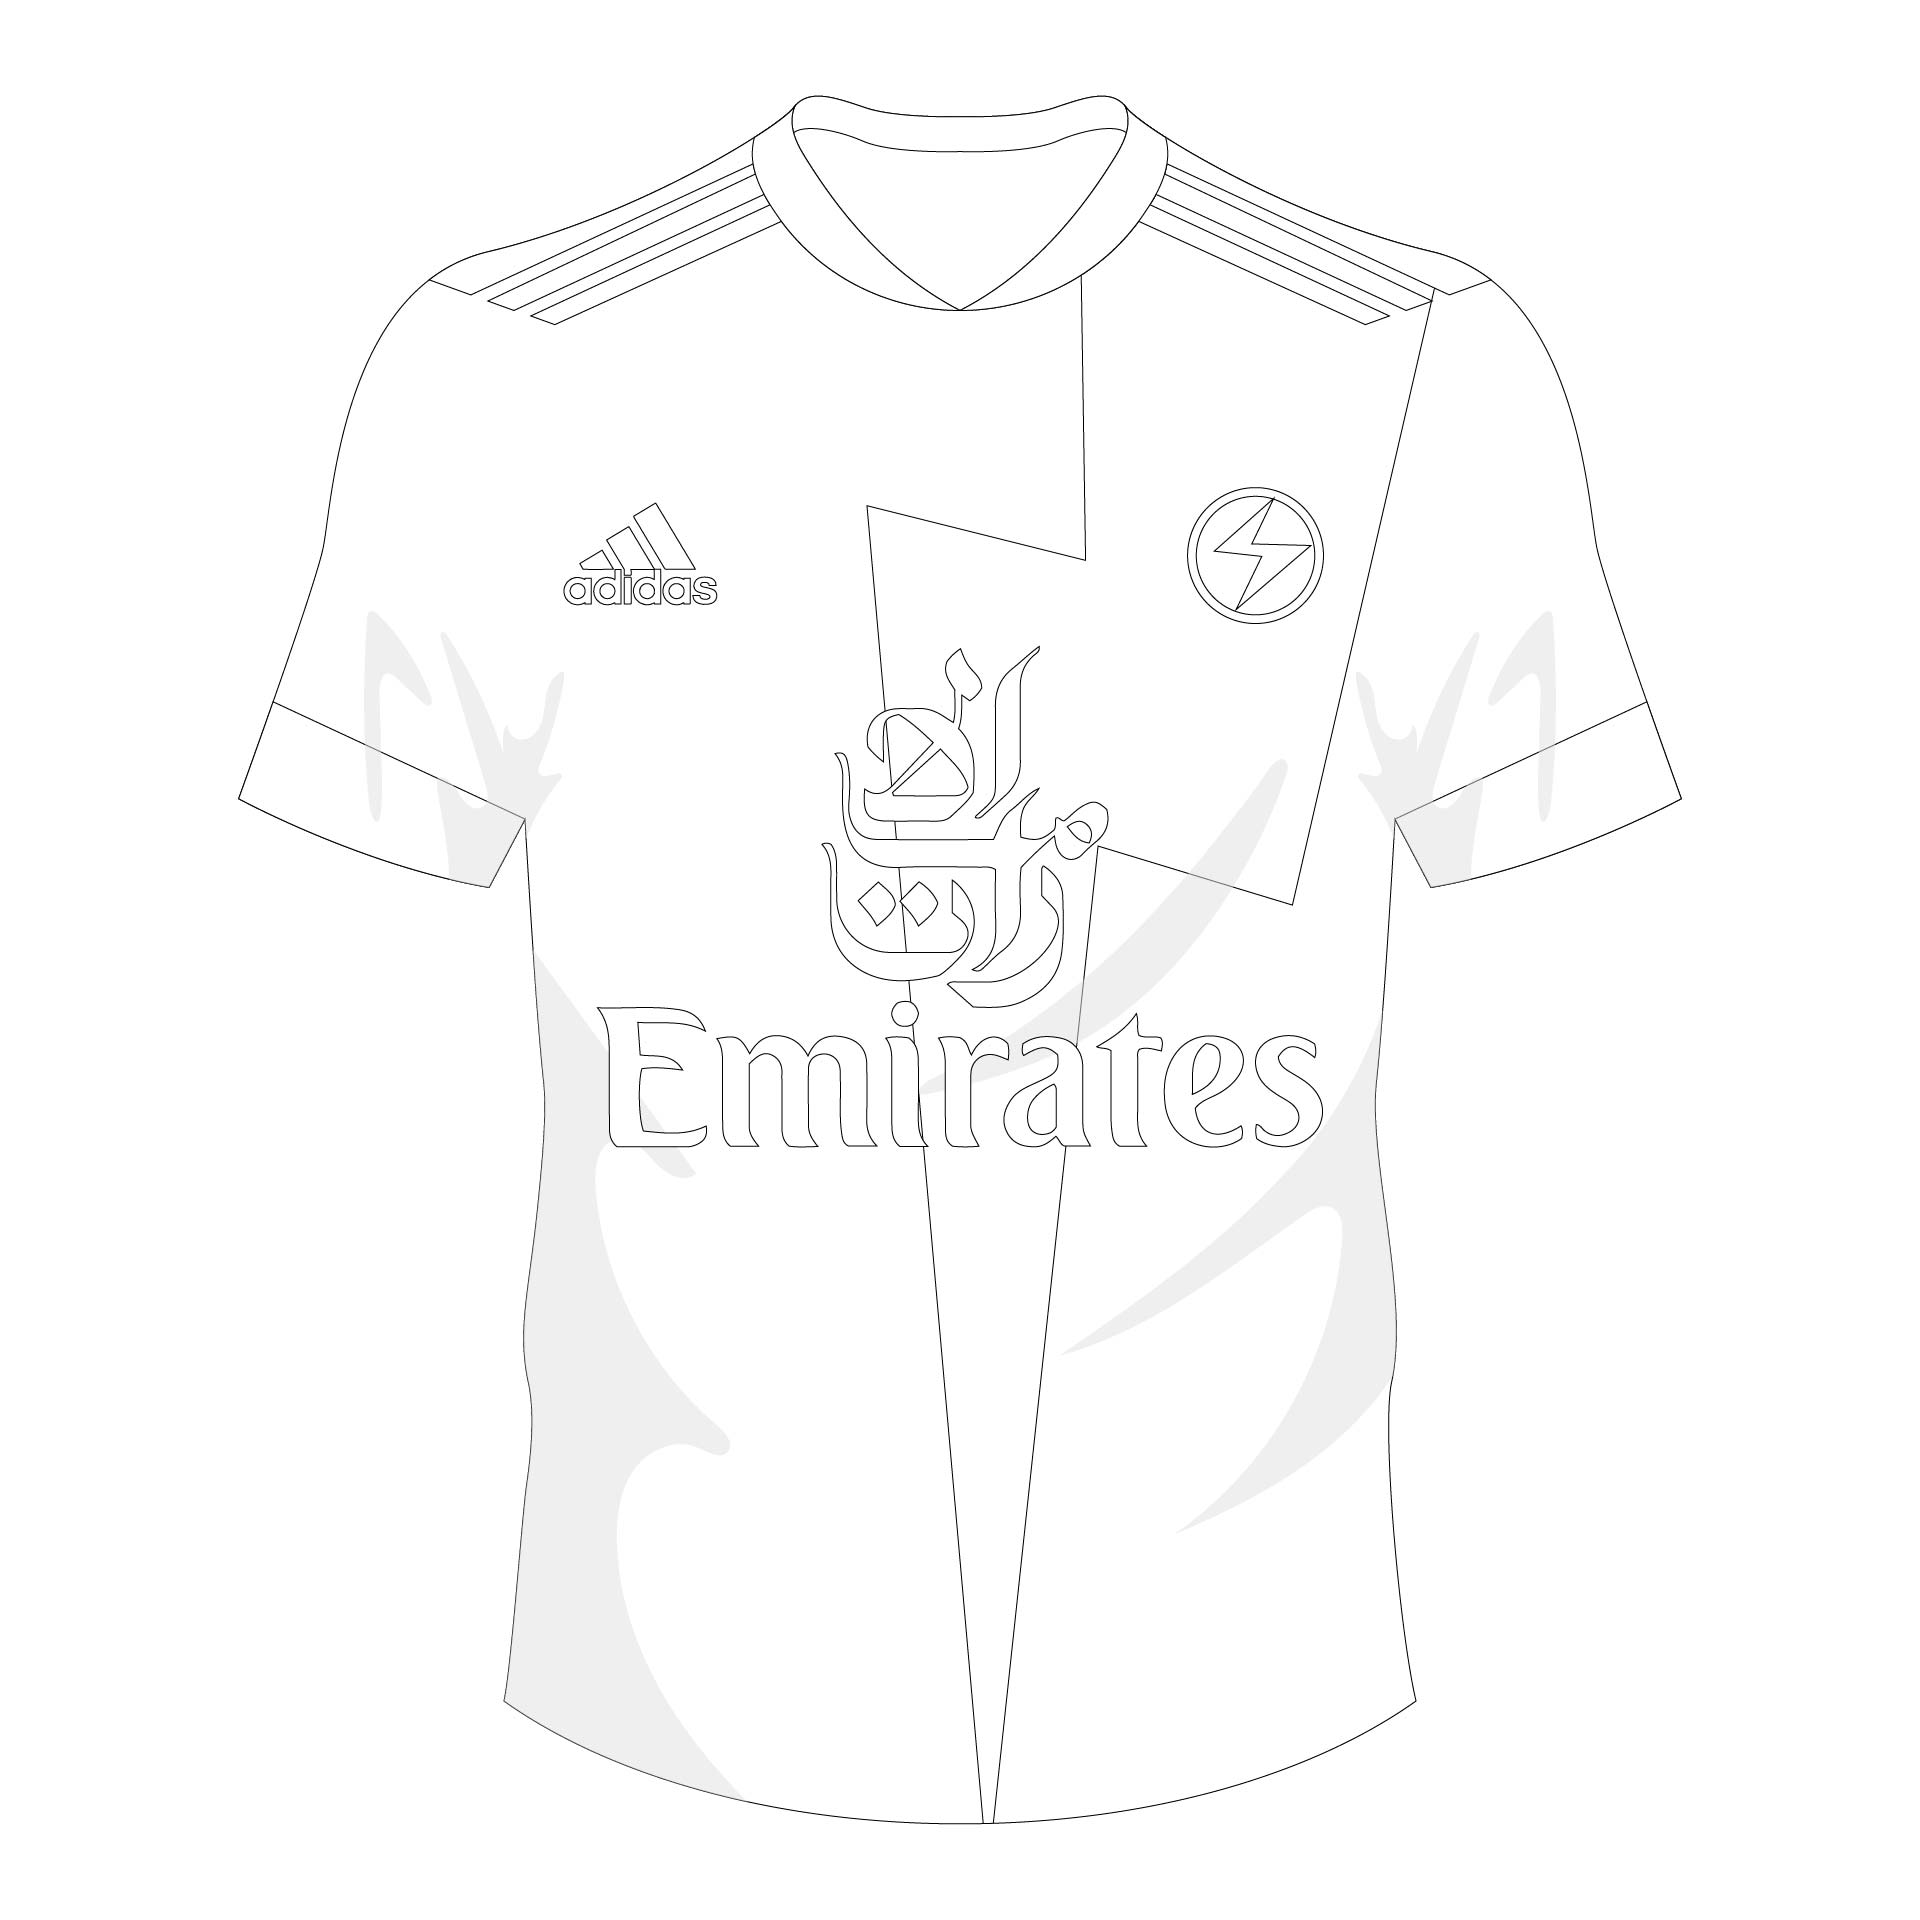 8-best-images-of-football-jersey-template-printable-stencils-football